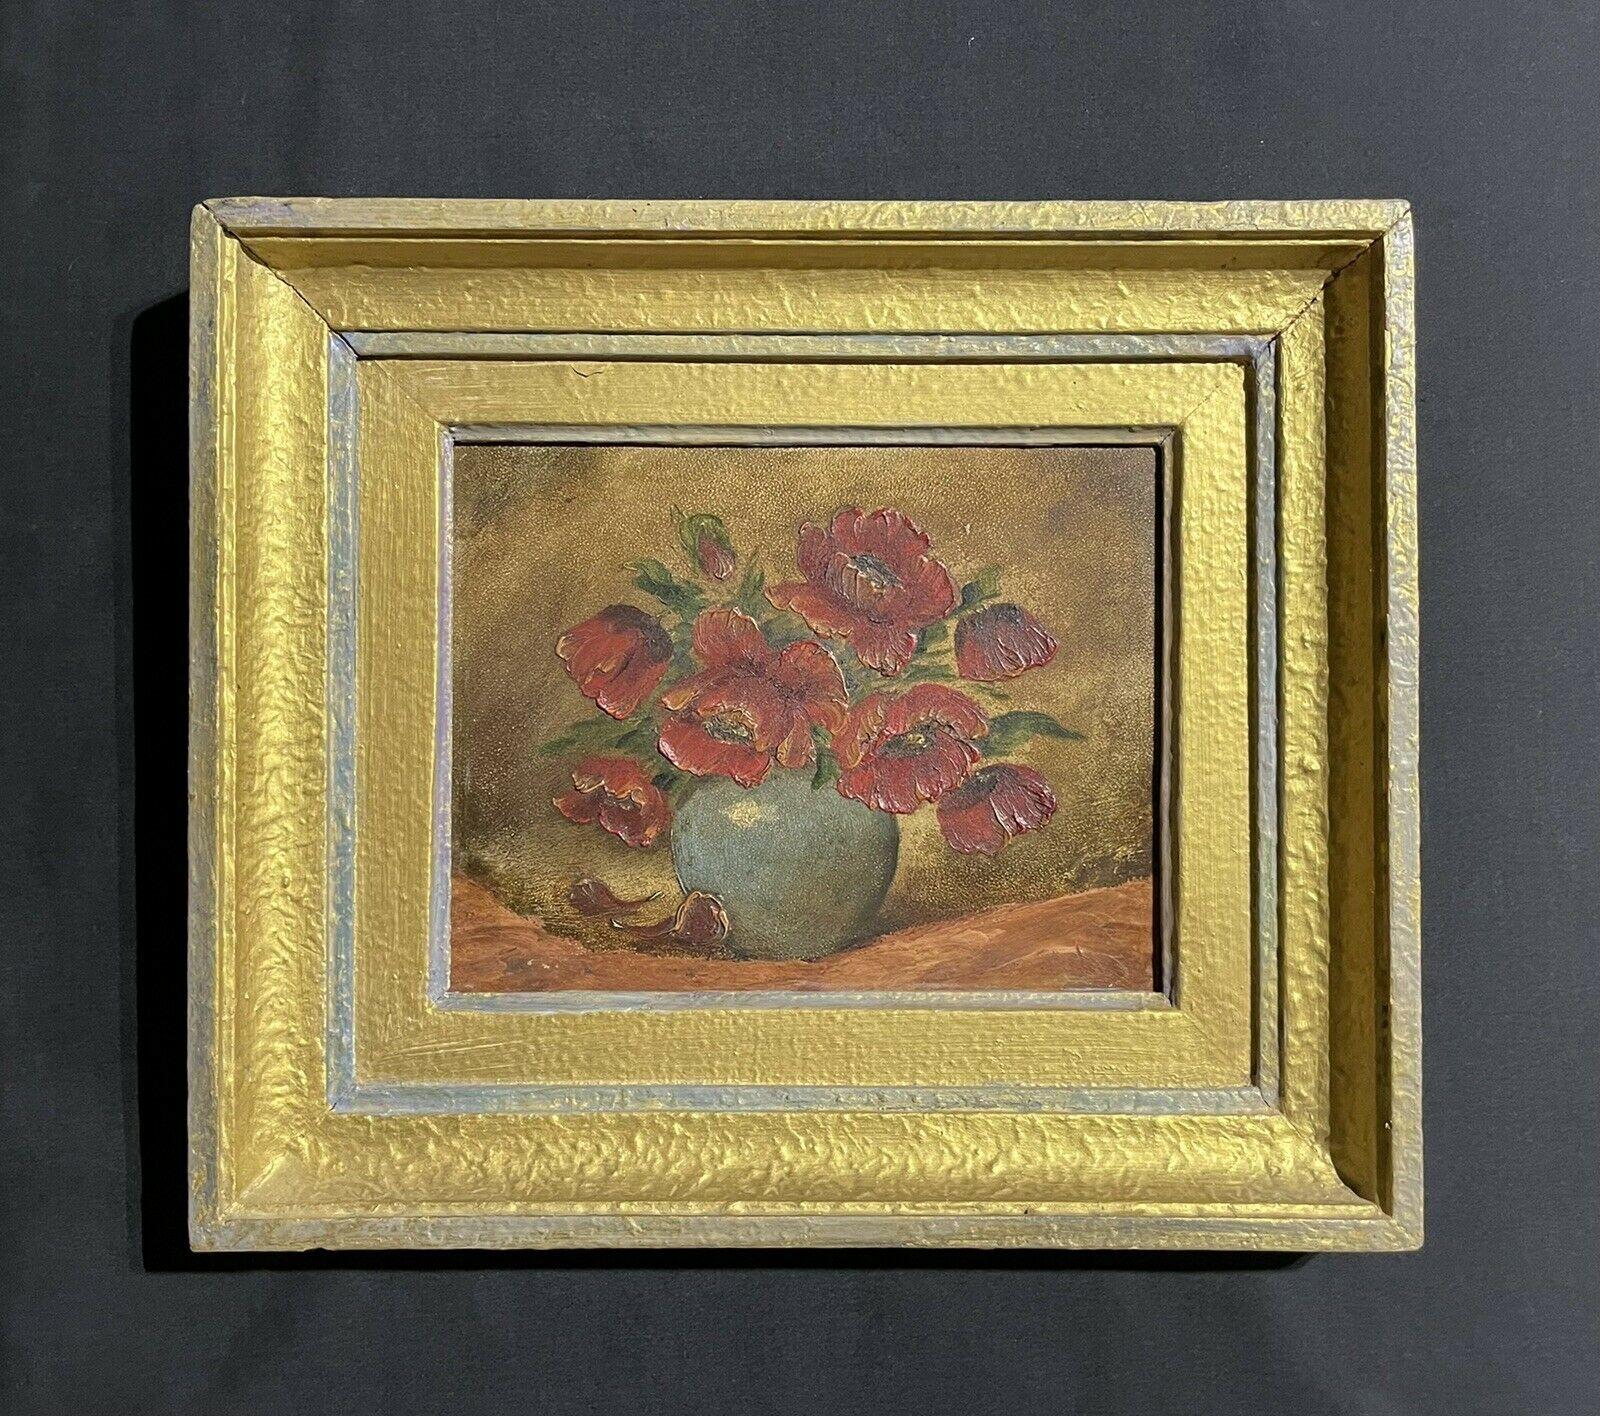 VINTAGE FRENCH OIL PAINTING - STILL LIFE OF FLOWERS IN BOWL - FRAMED - Impressionist Painting by Unknown